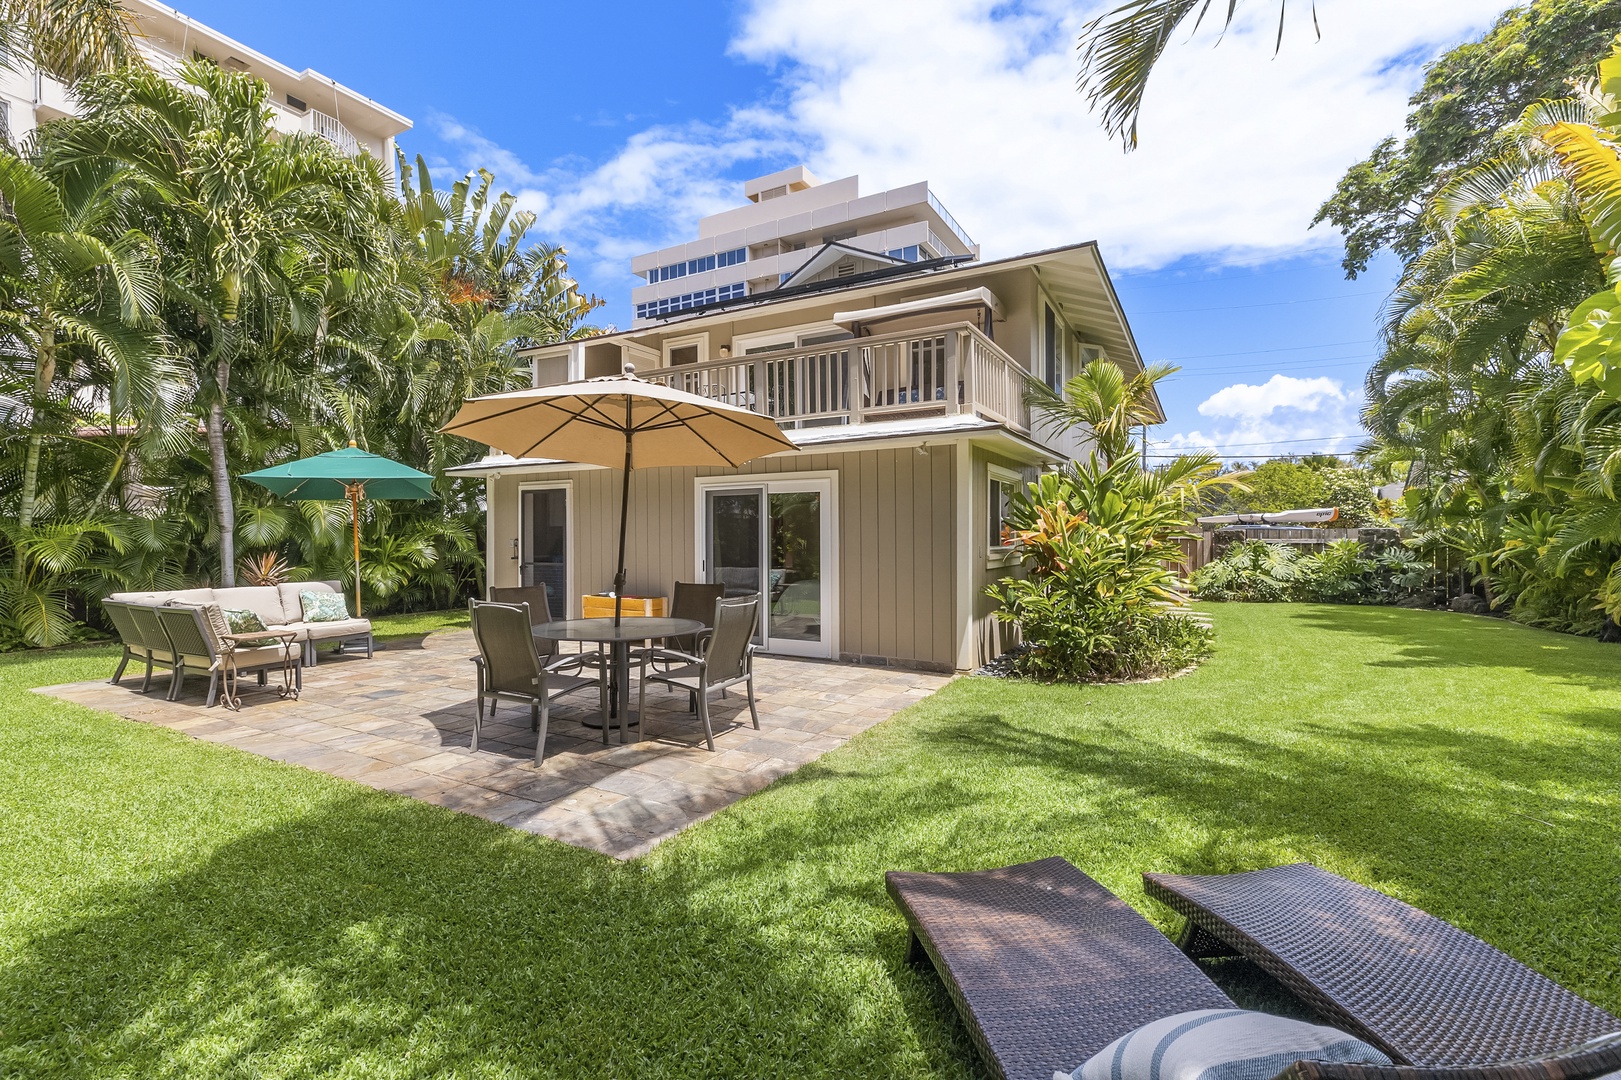 Honolulu Vacation Rentals, Hale Nui - Large garden with outdoor furniture